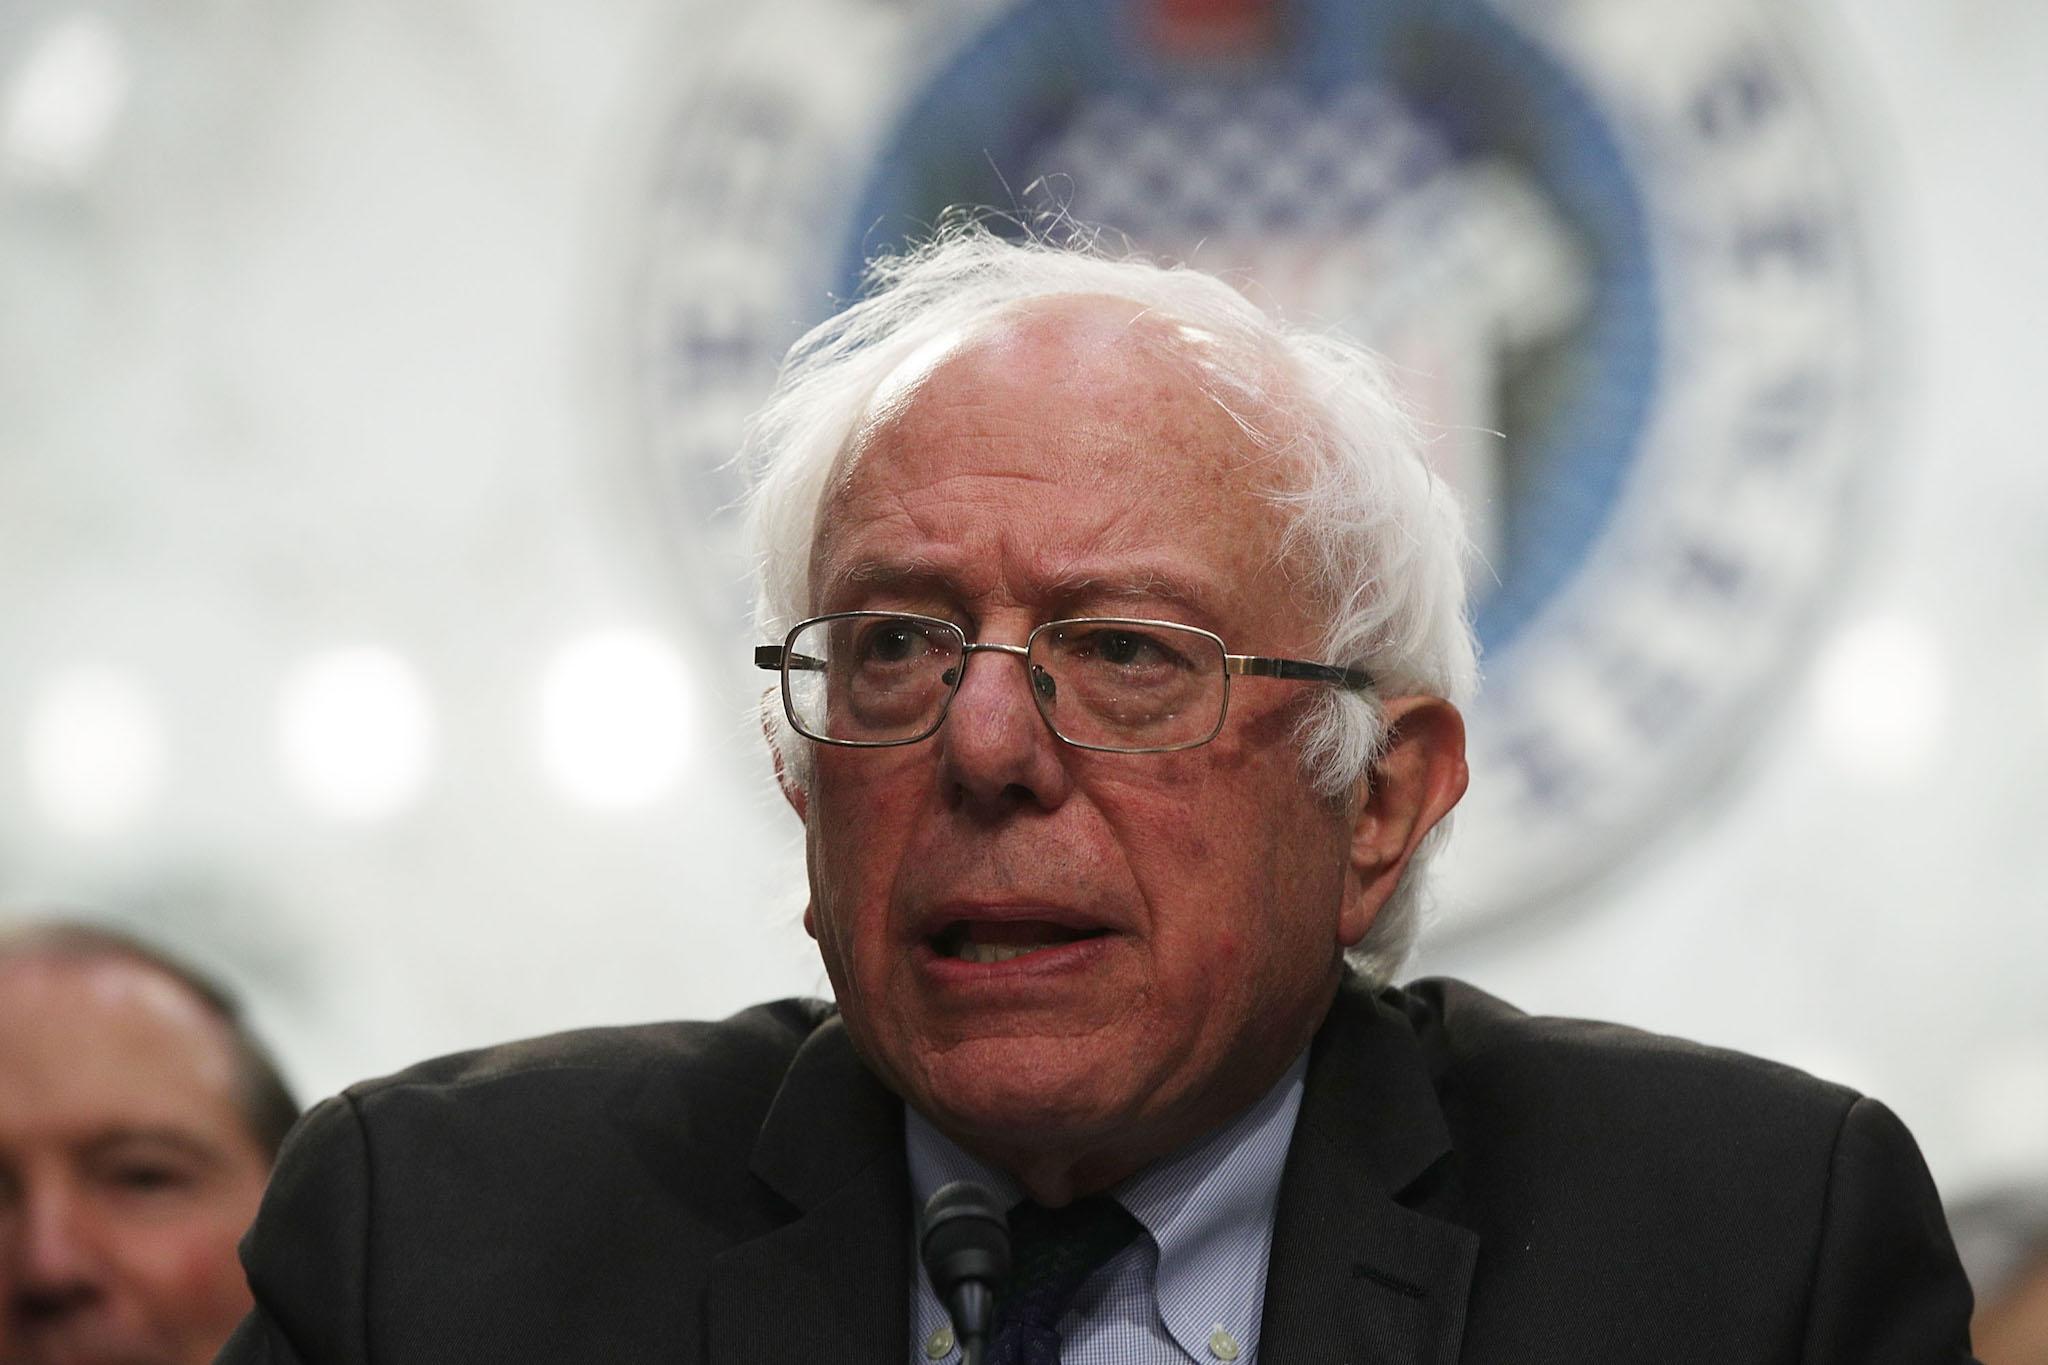 Might is right: Mr Sanders, not the President of the United States